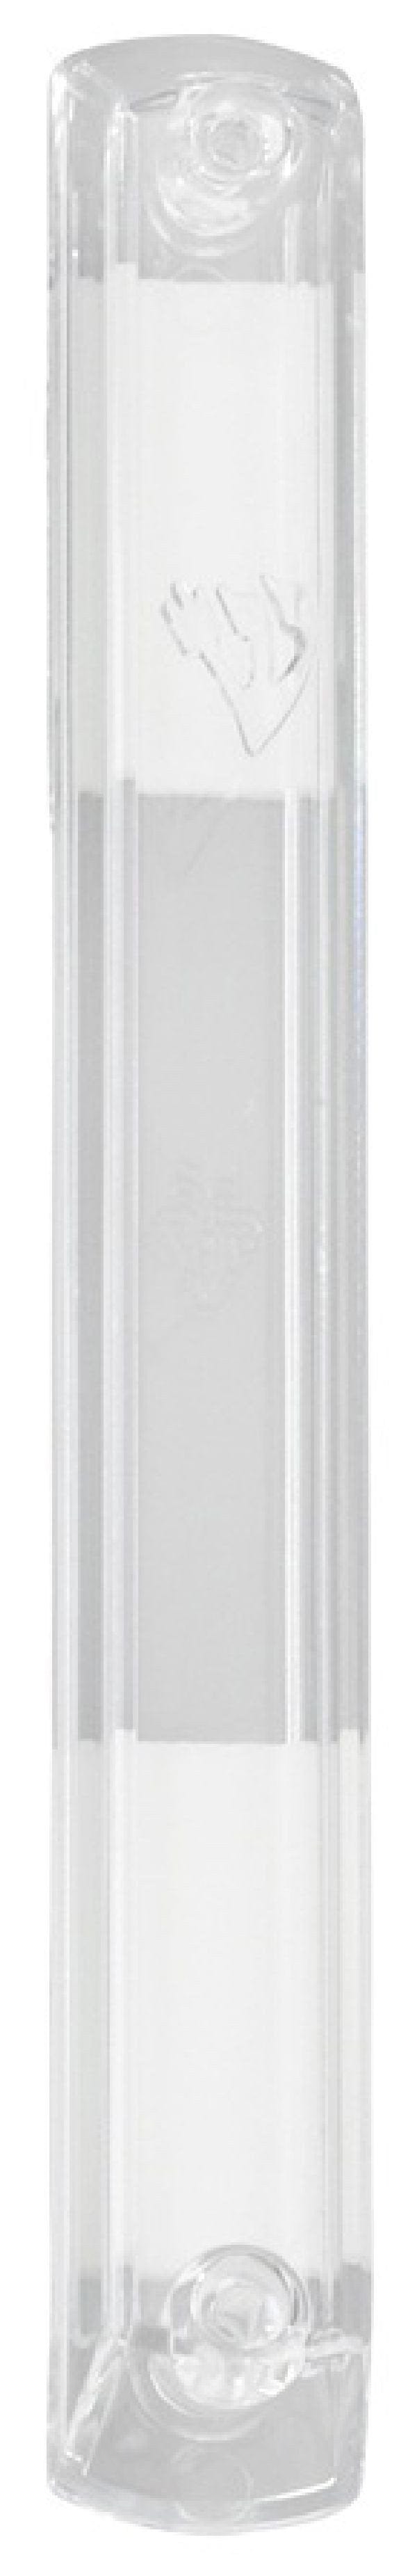 Lucite Mezuzah Cases - Clear Shin. Double Sided Tape 